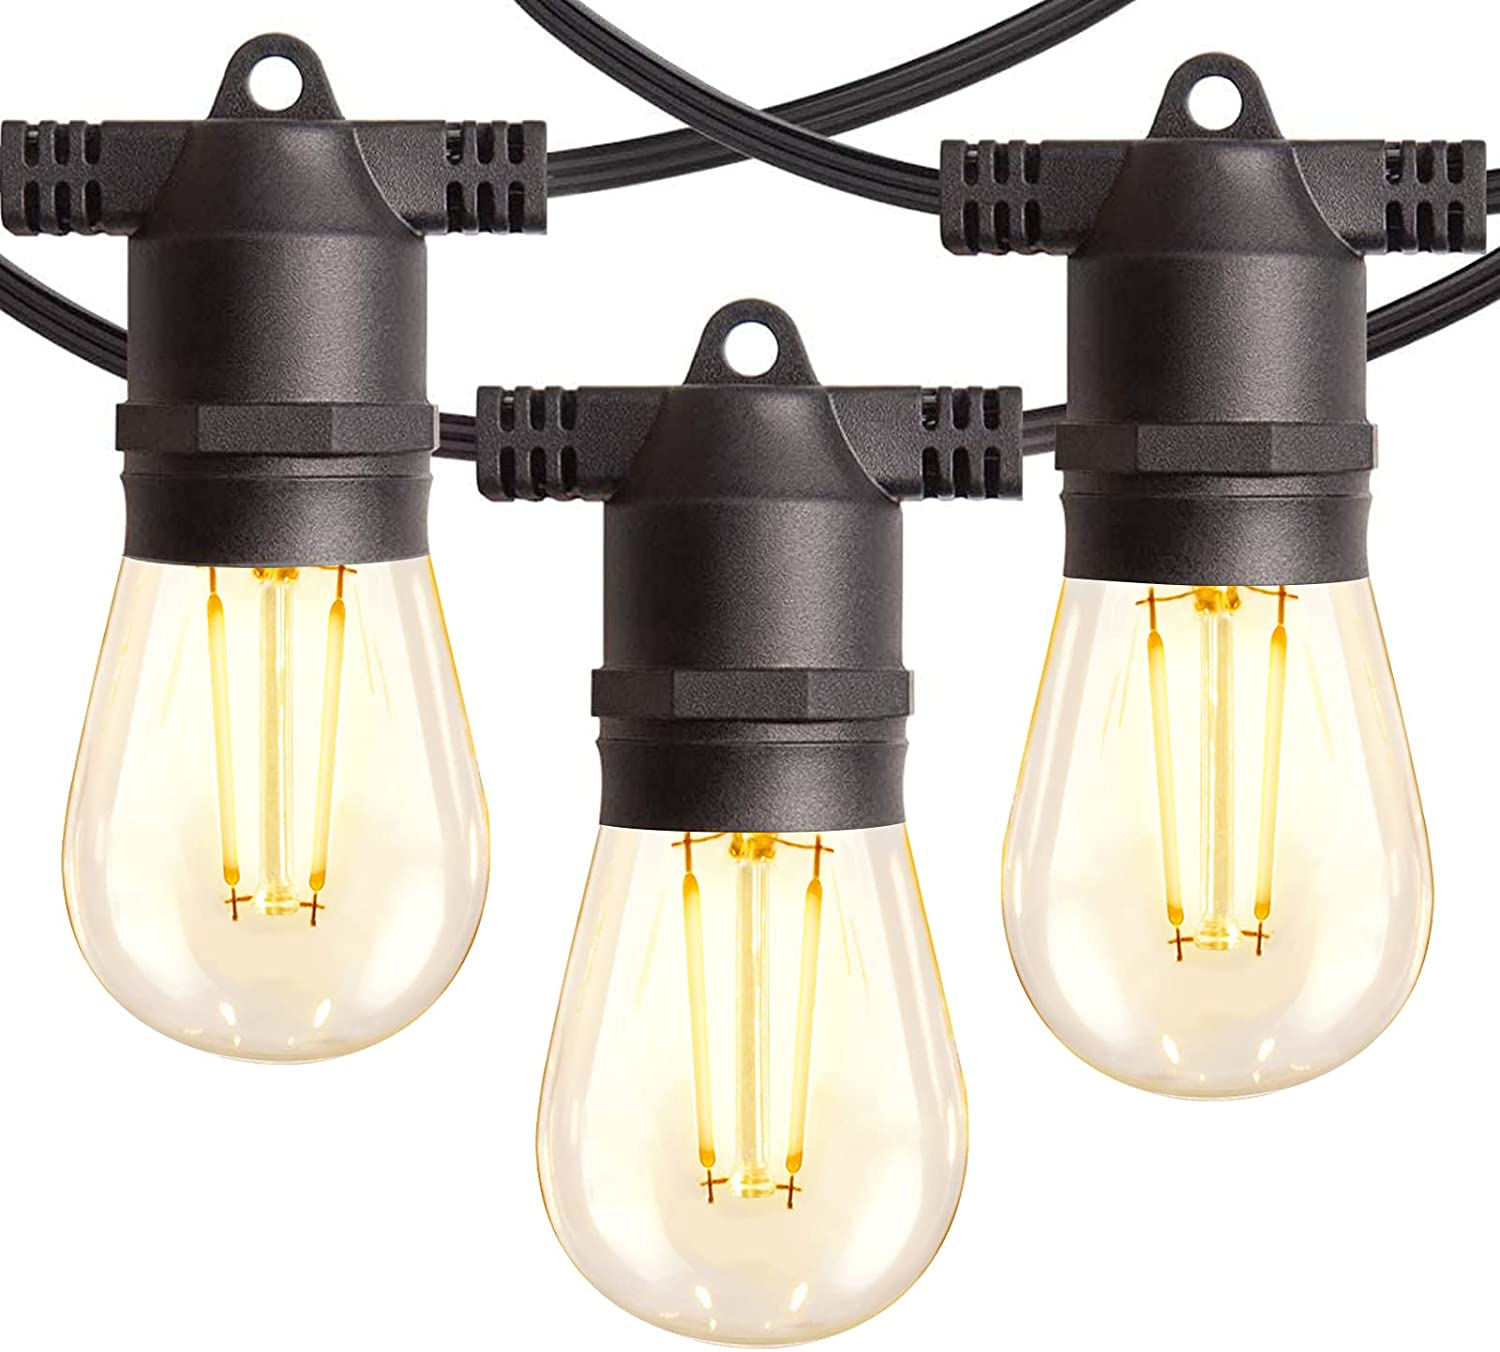 48FT Low Voltage Outdoor String Lights, LED Plastic bulb, with 12V Adapter $24.99 + Free Shipping w/ Prime